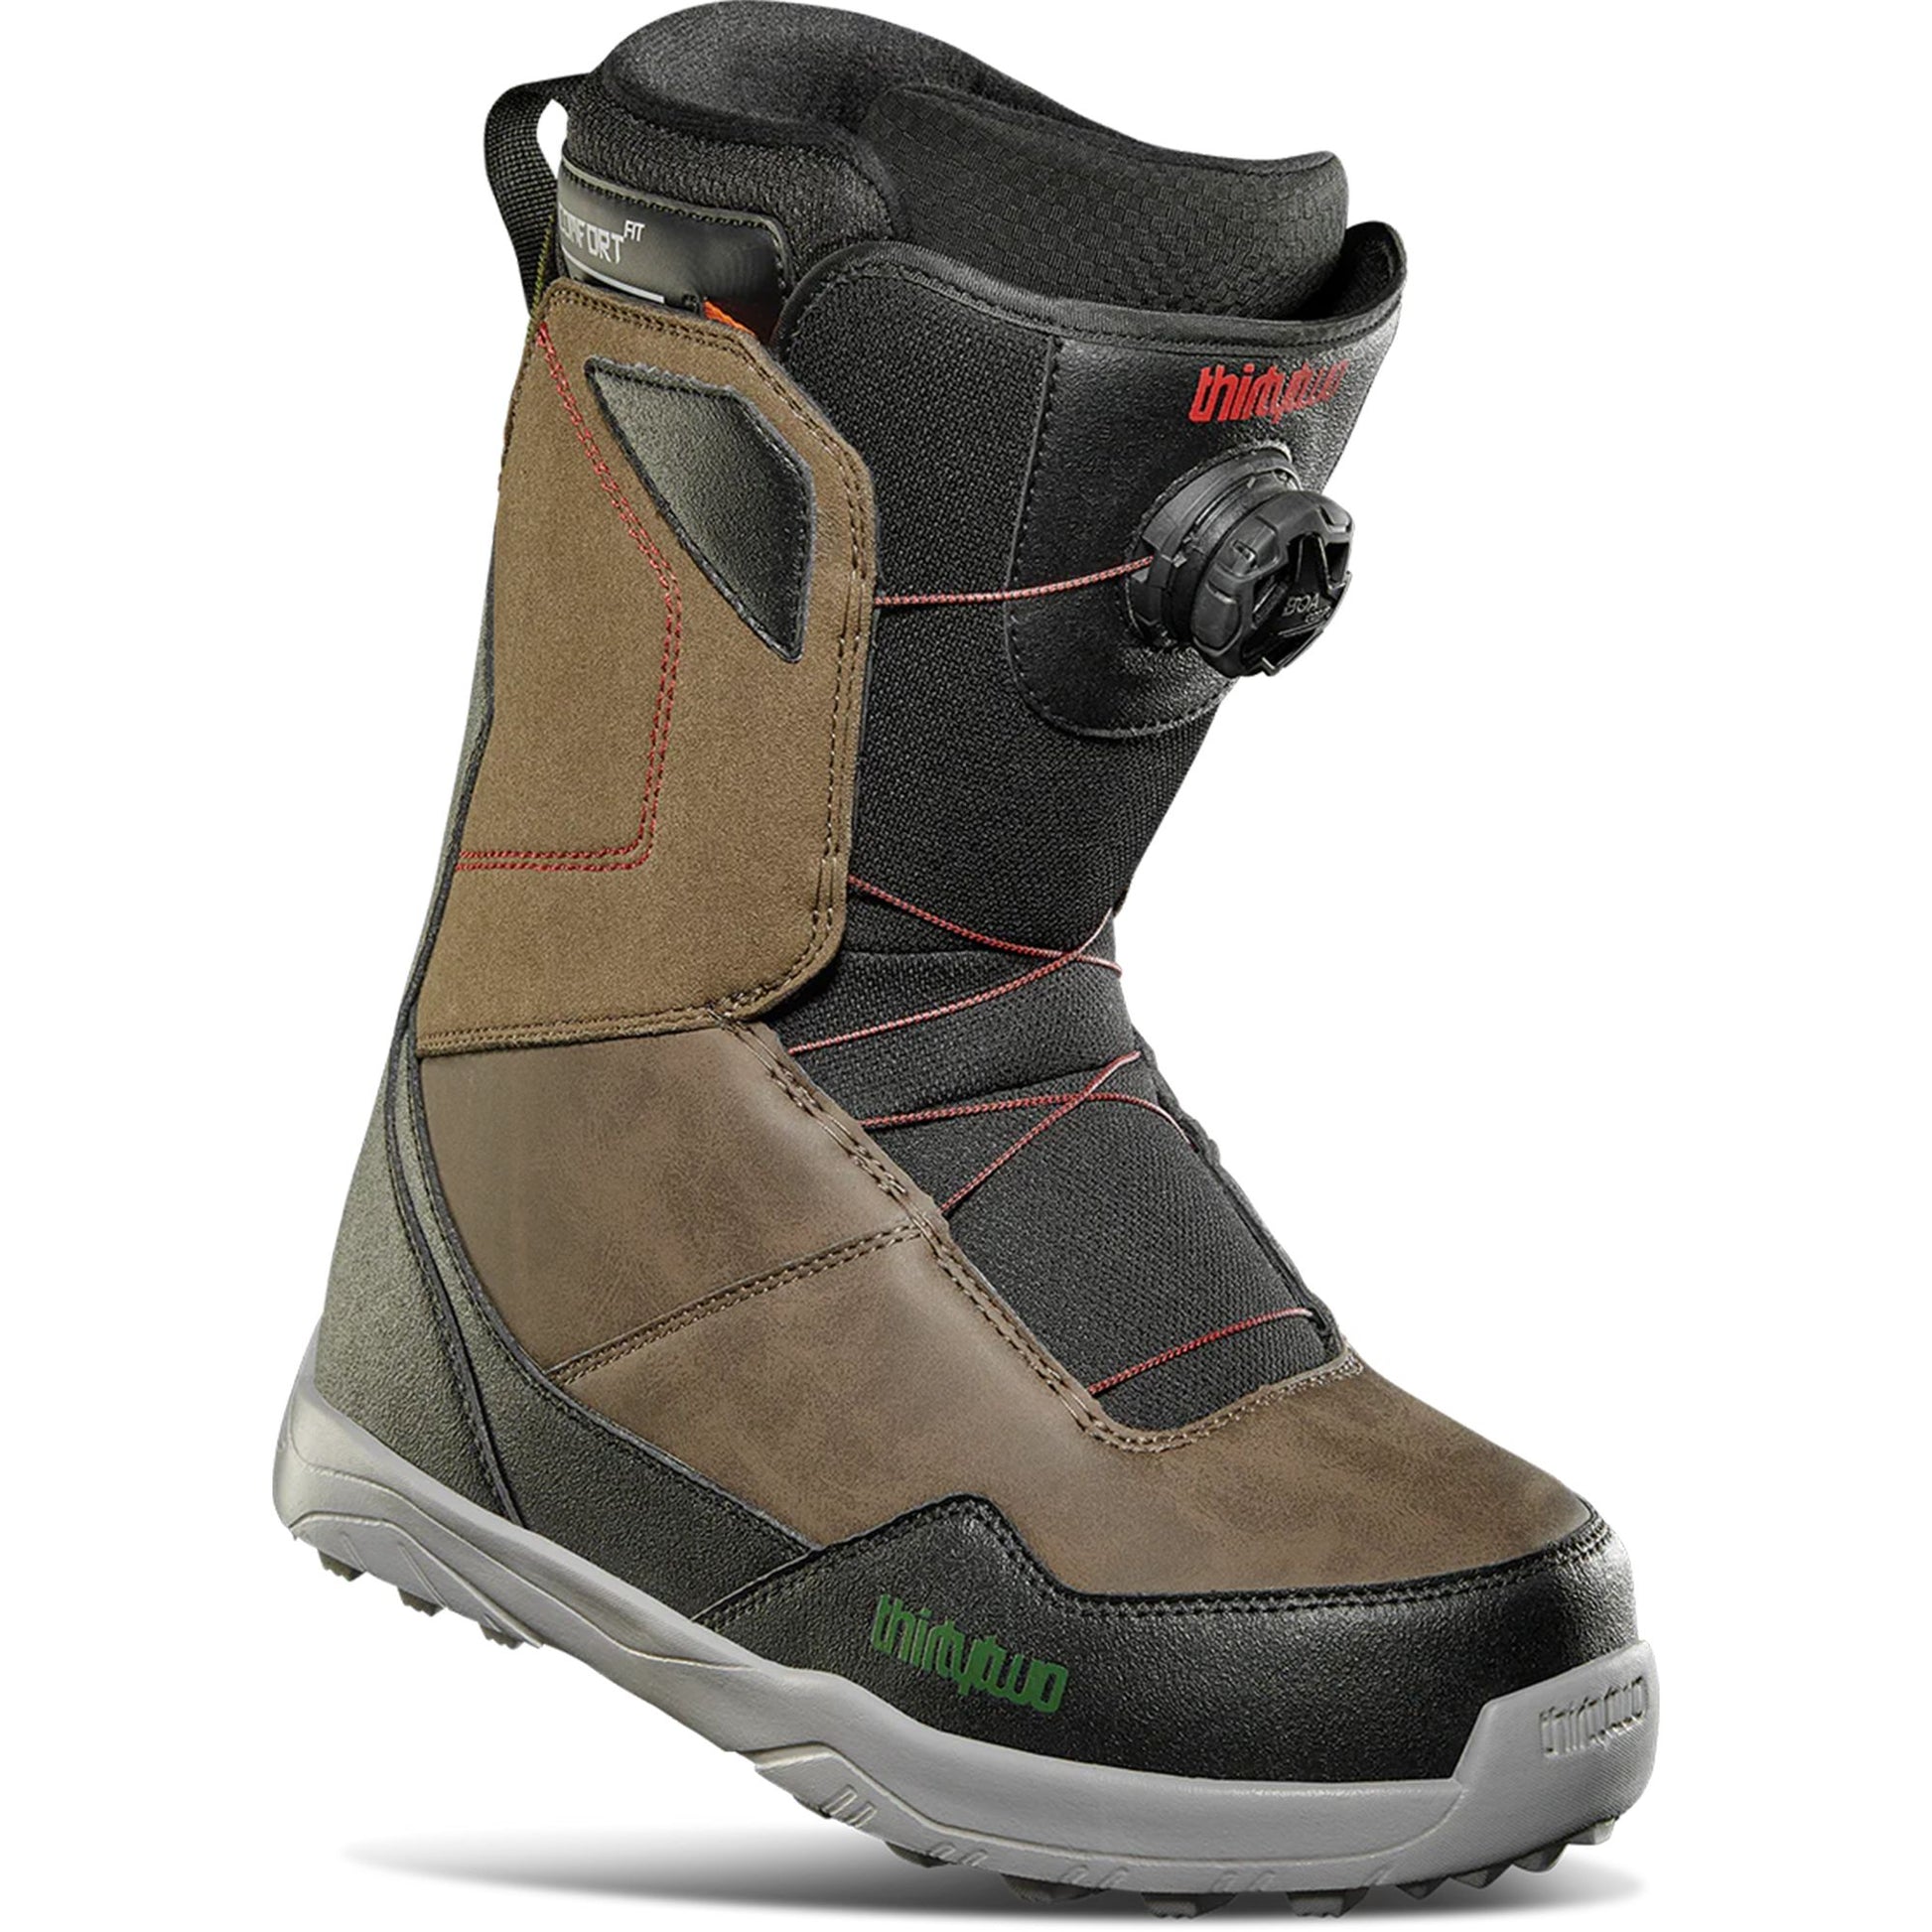 ThirtyTwo Shifty BOA Snowboard Boots Black/Brown Snowboard Boots